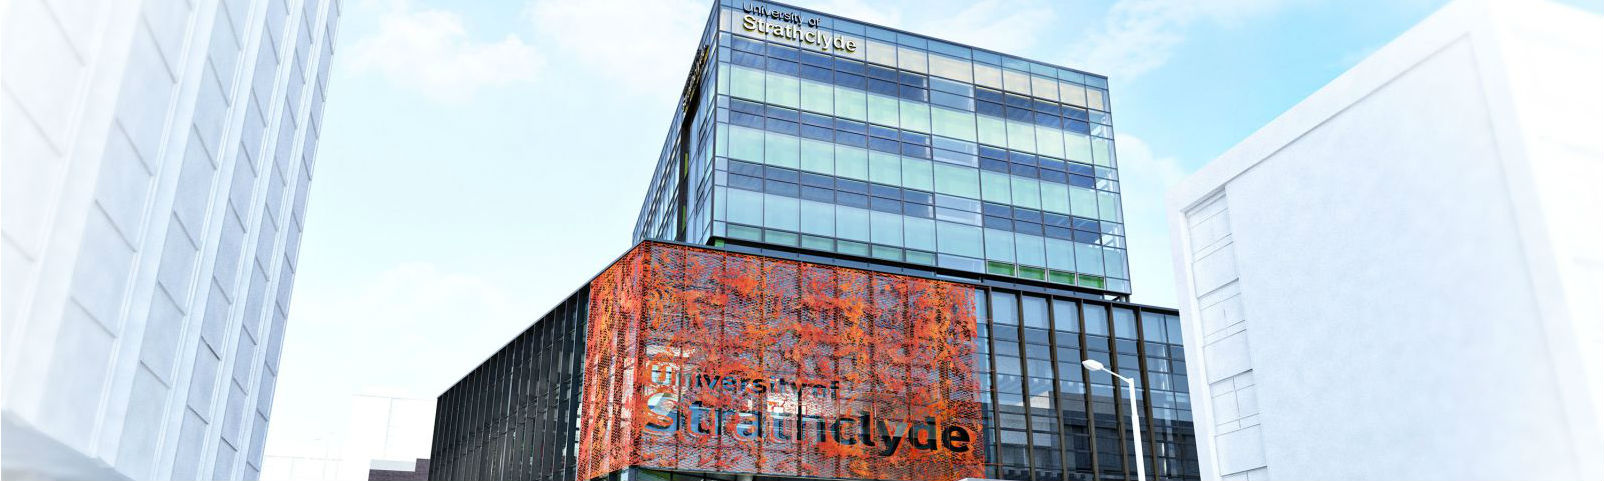 New £60m Learning Hub at Strathclyde